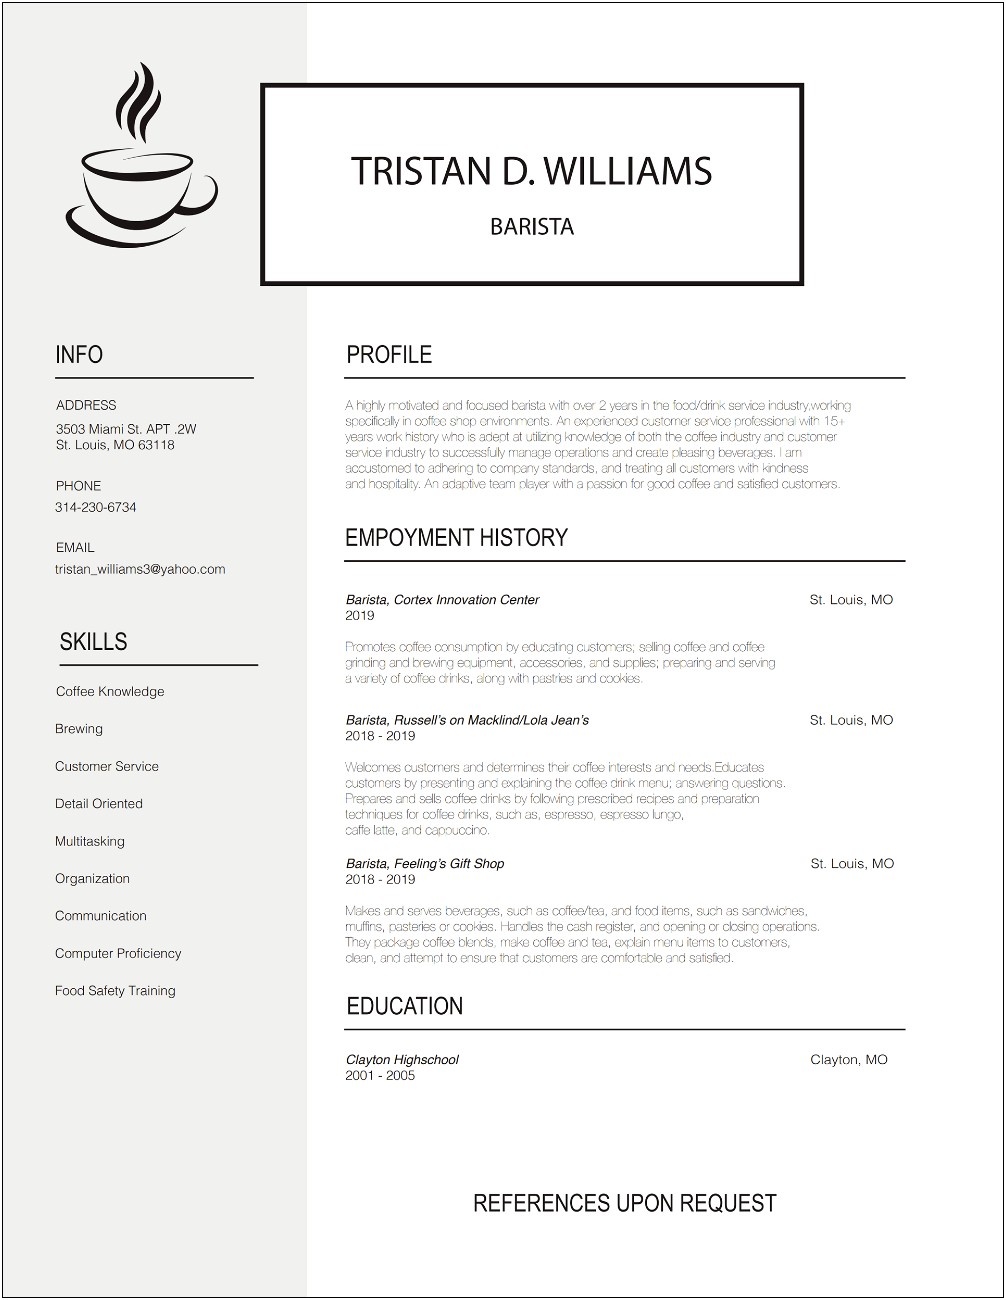 Sample Resume For Coffee Shop Barista